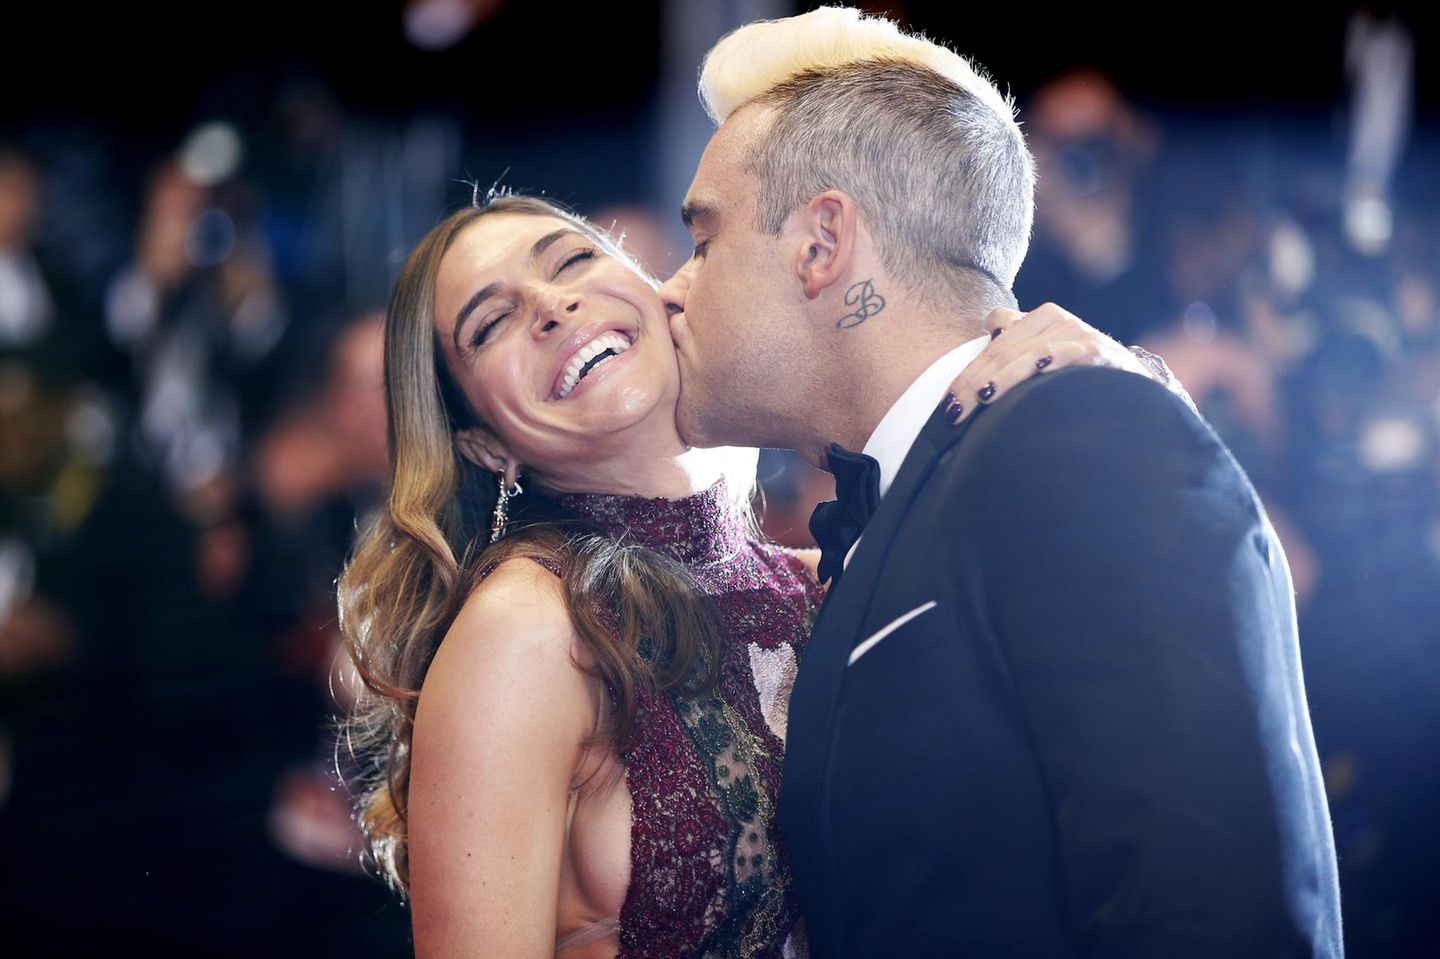 British singer Robbie Williams (R) kisses his wife Ayda Field as they arrive for the screening of the film 'The Sea of Trees' at the 68th Cannes Film Festival in Cannes, southeastern France, on May 16, 2015.   AFP PHOTO / VALERY HACHE        (Photo c